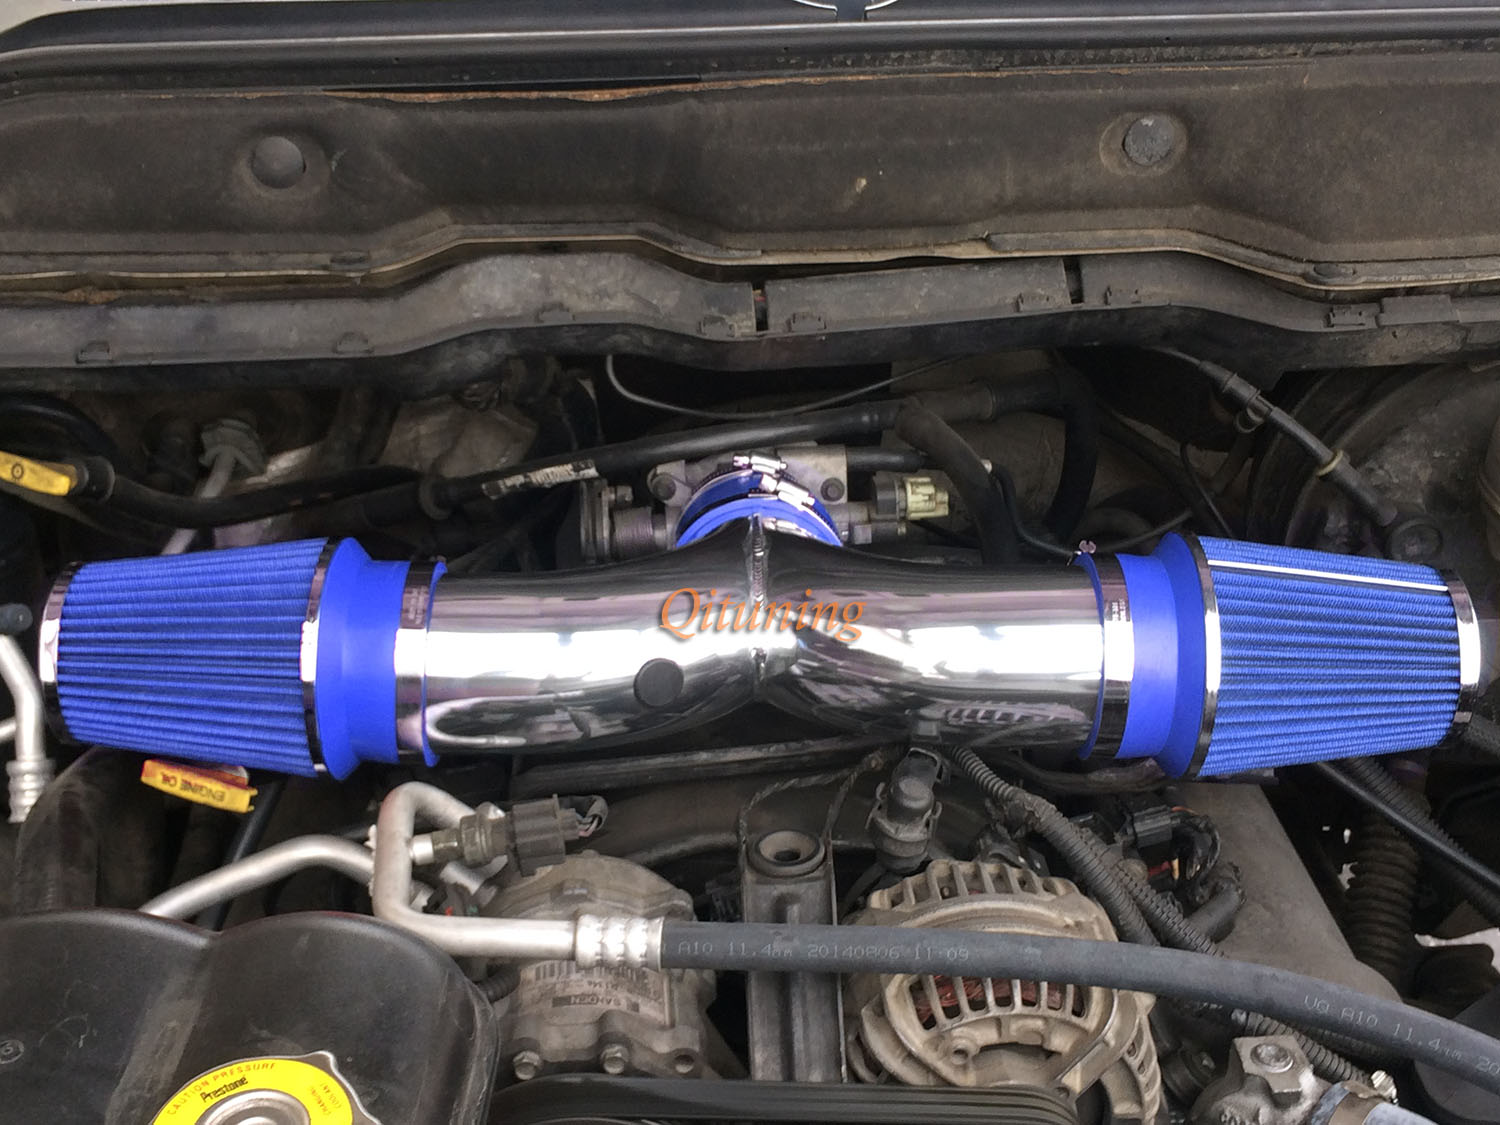 Blue Dual Twin Air Intake System Kit Filter For 2002-2003 Jeep Liberty 3.7L V6